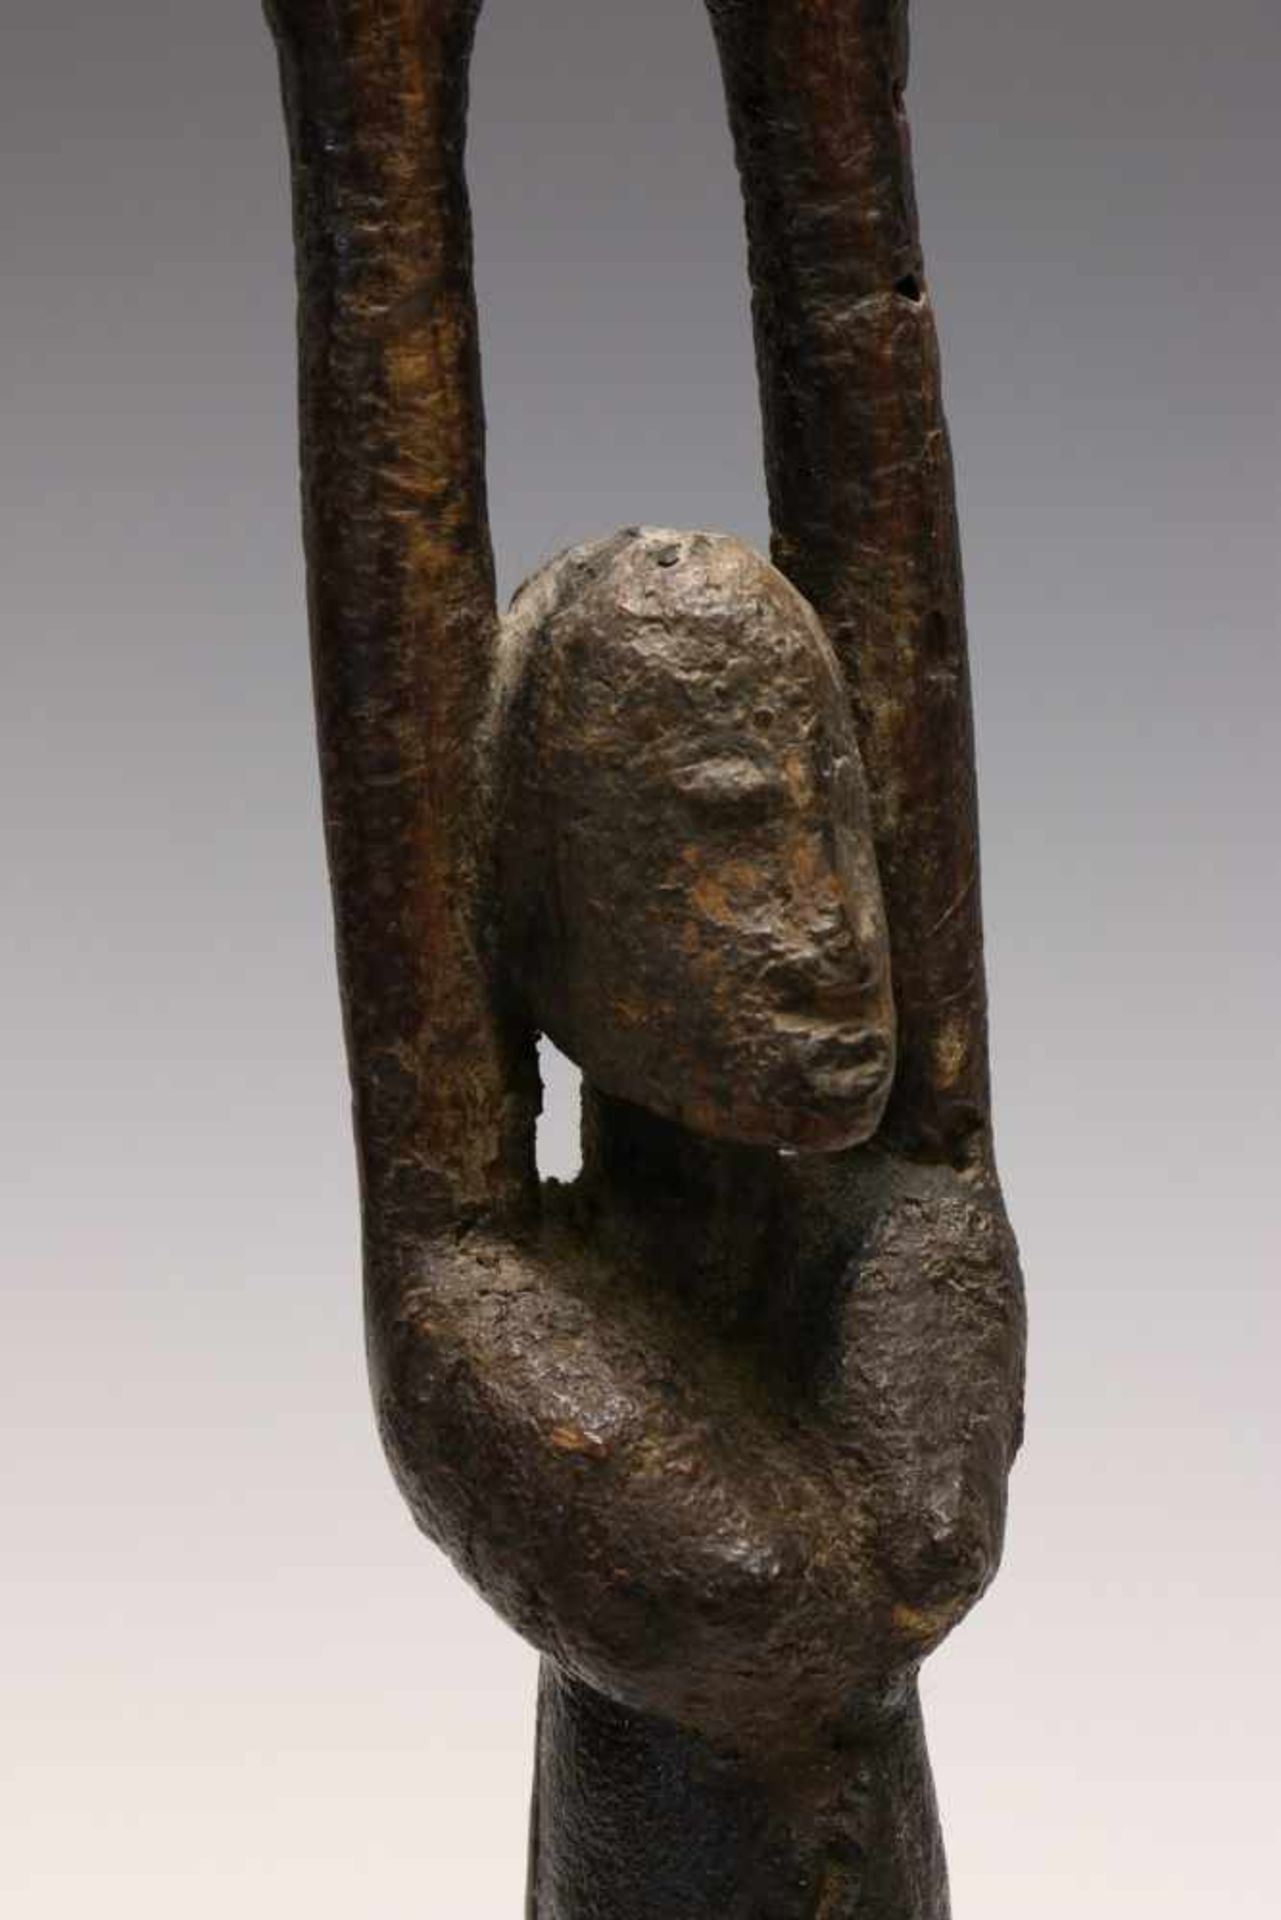 Dogon, standing antropomorphic figure,with raised arms and dark oily patina. Provenance, Steven de